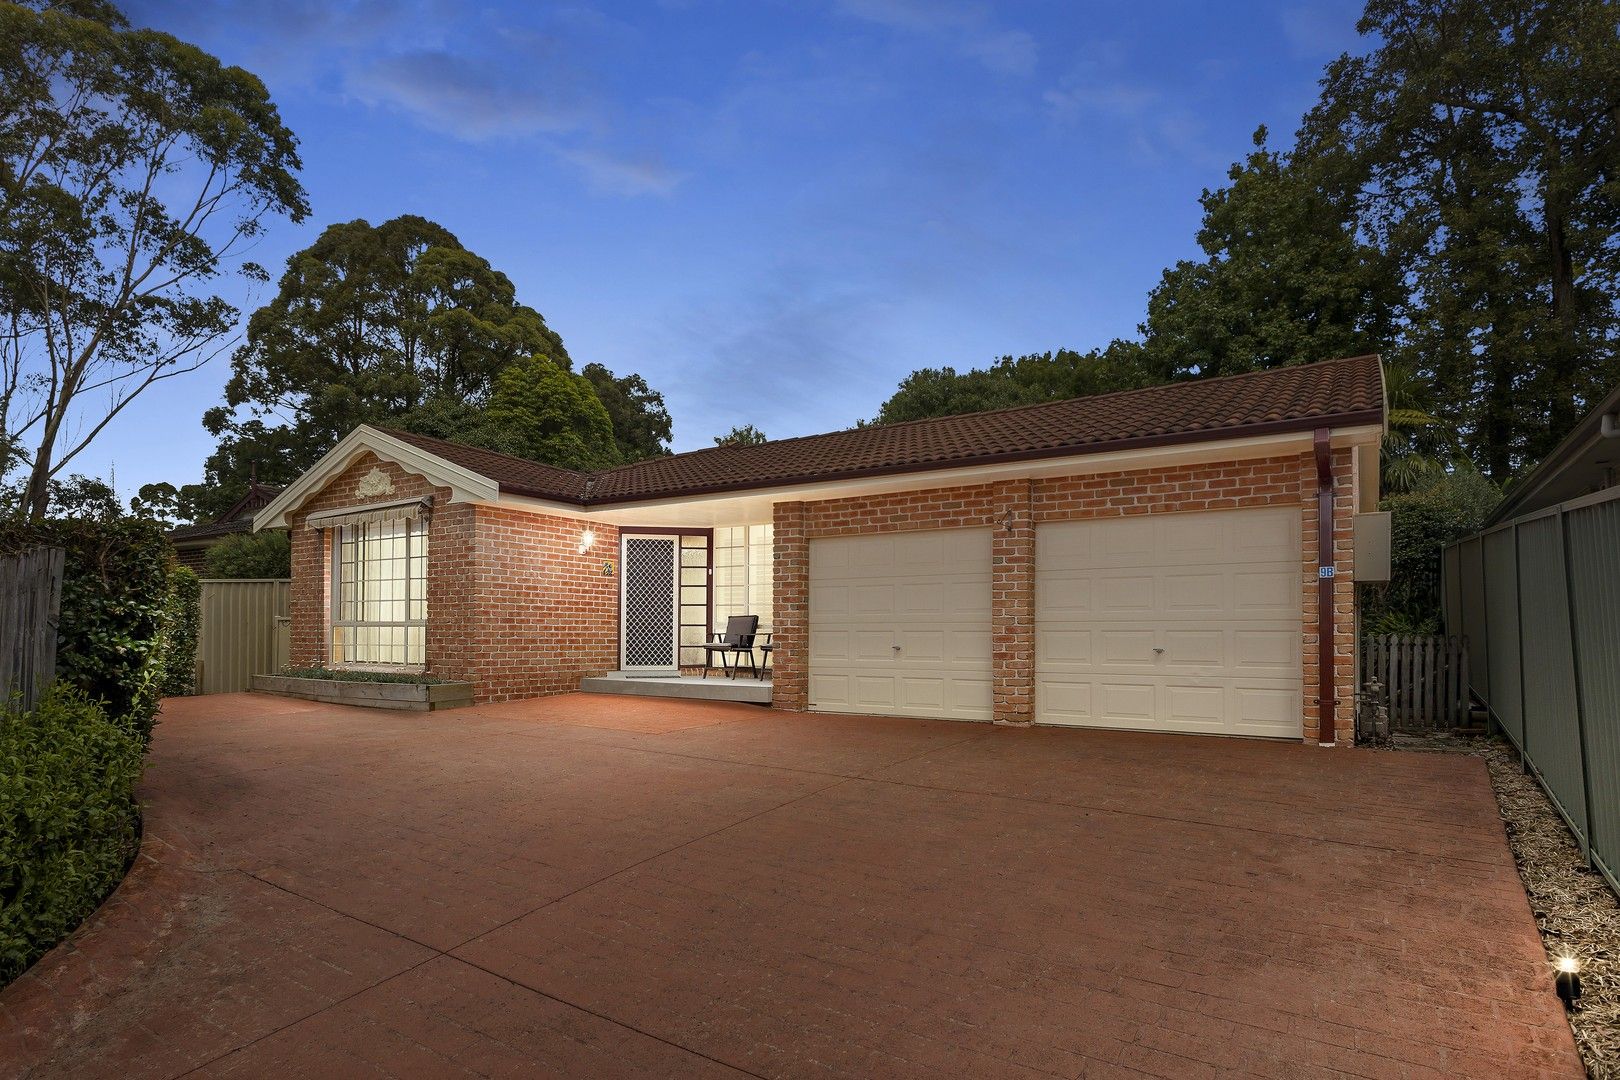 4 bedrooms House in 9B lodge Street HORNSBY NSW, 2077